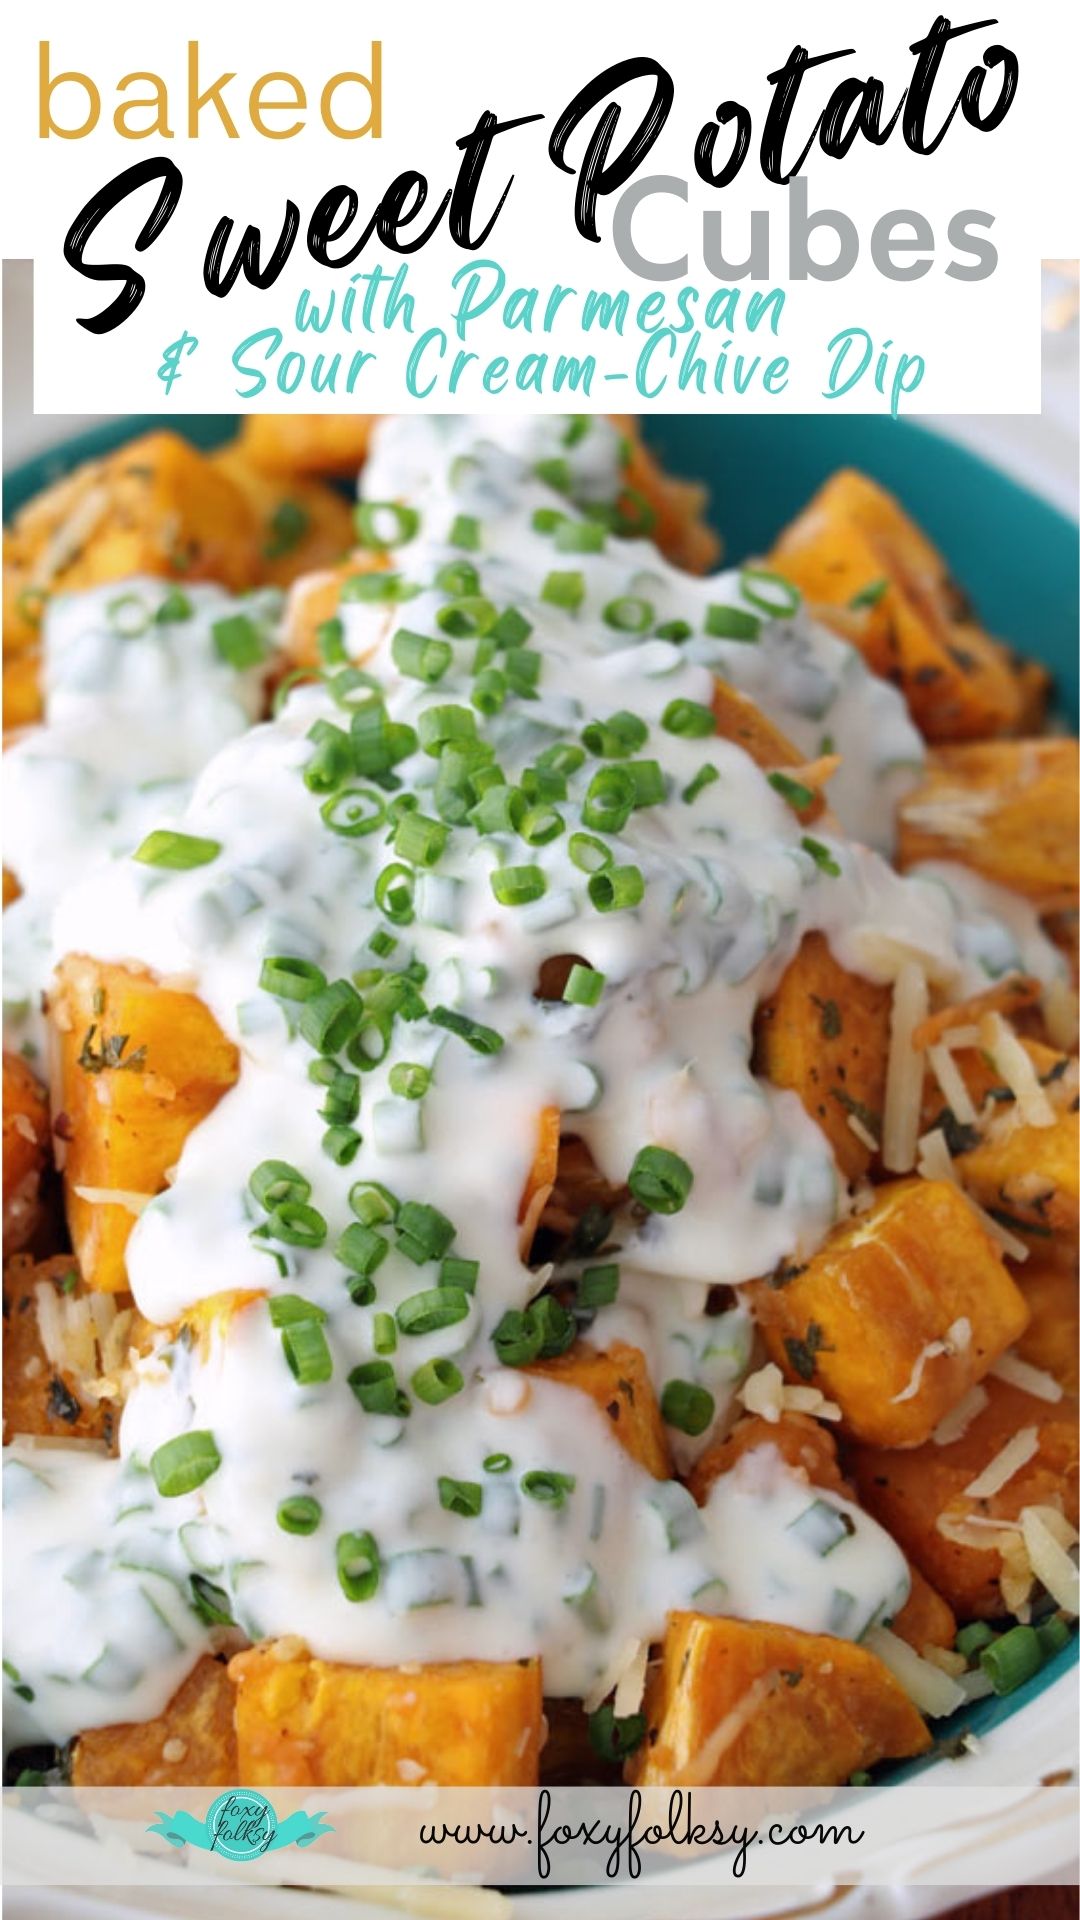 Baked sweet potato cubes with sour cream-chives dressing